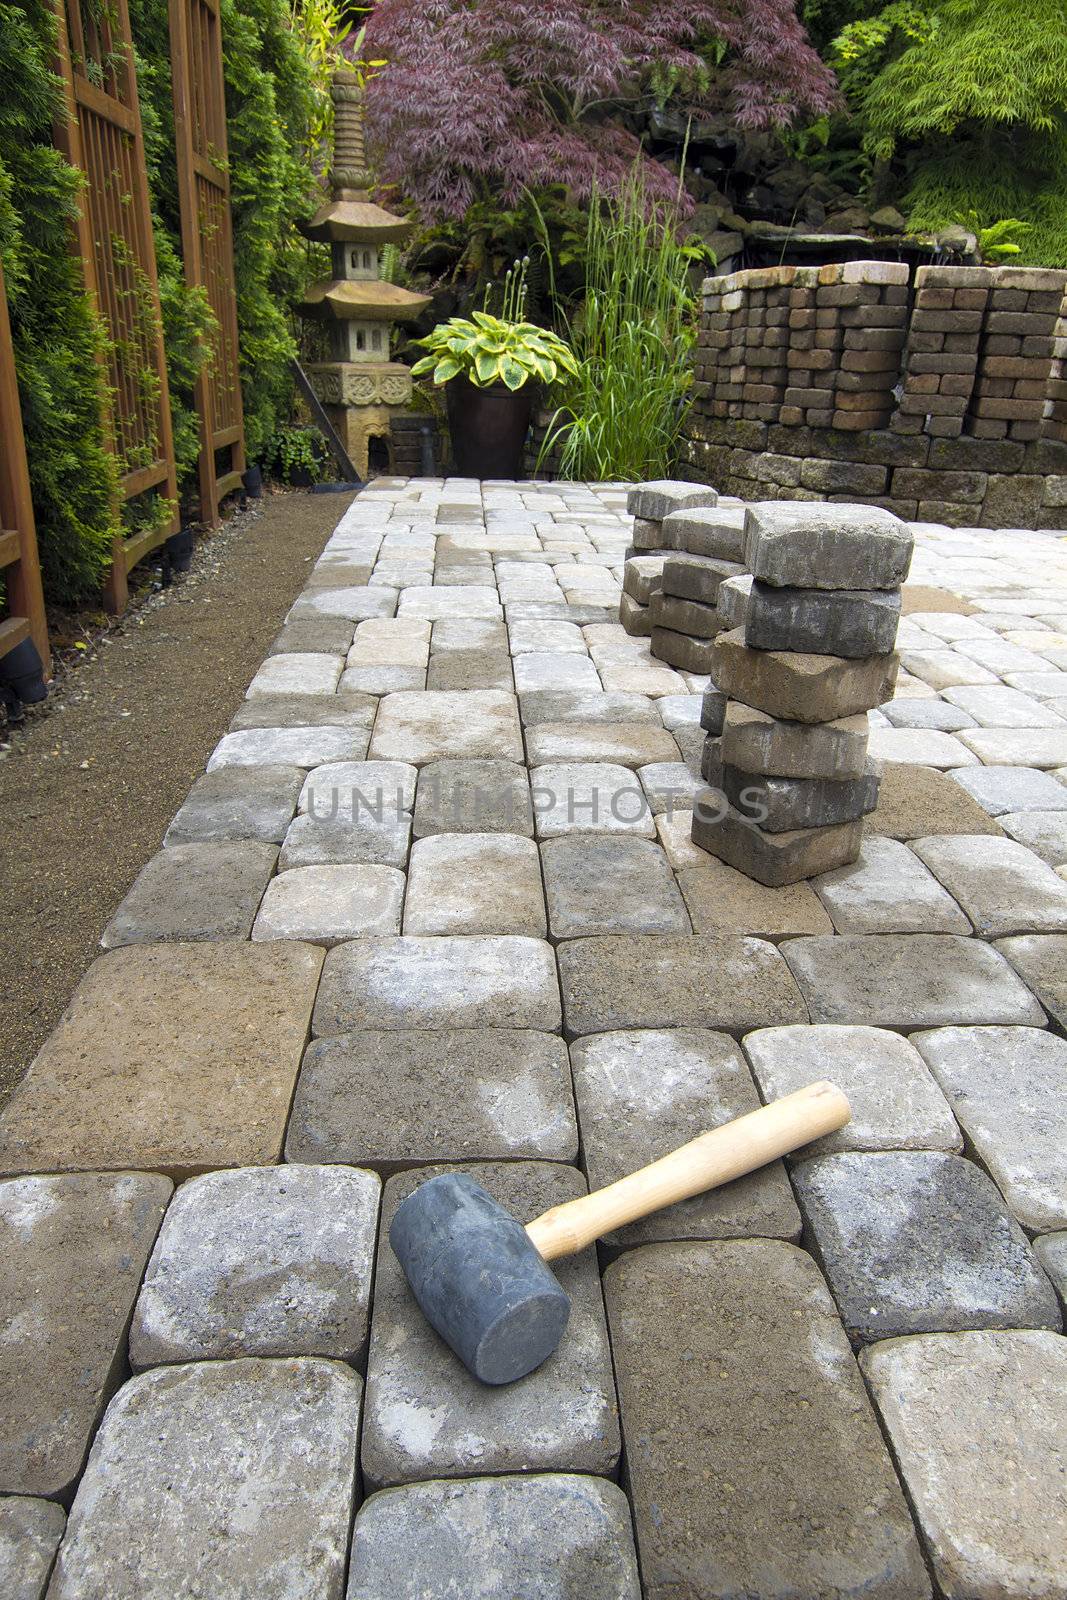 Laying Garden Pavers Patio by jpldesigns